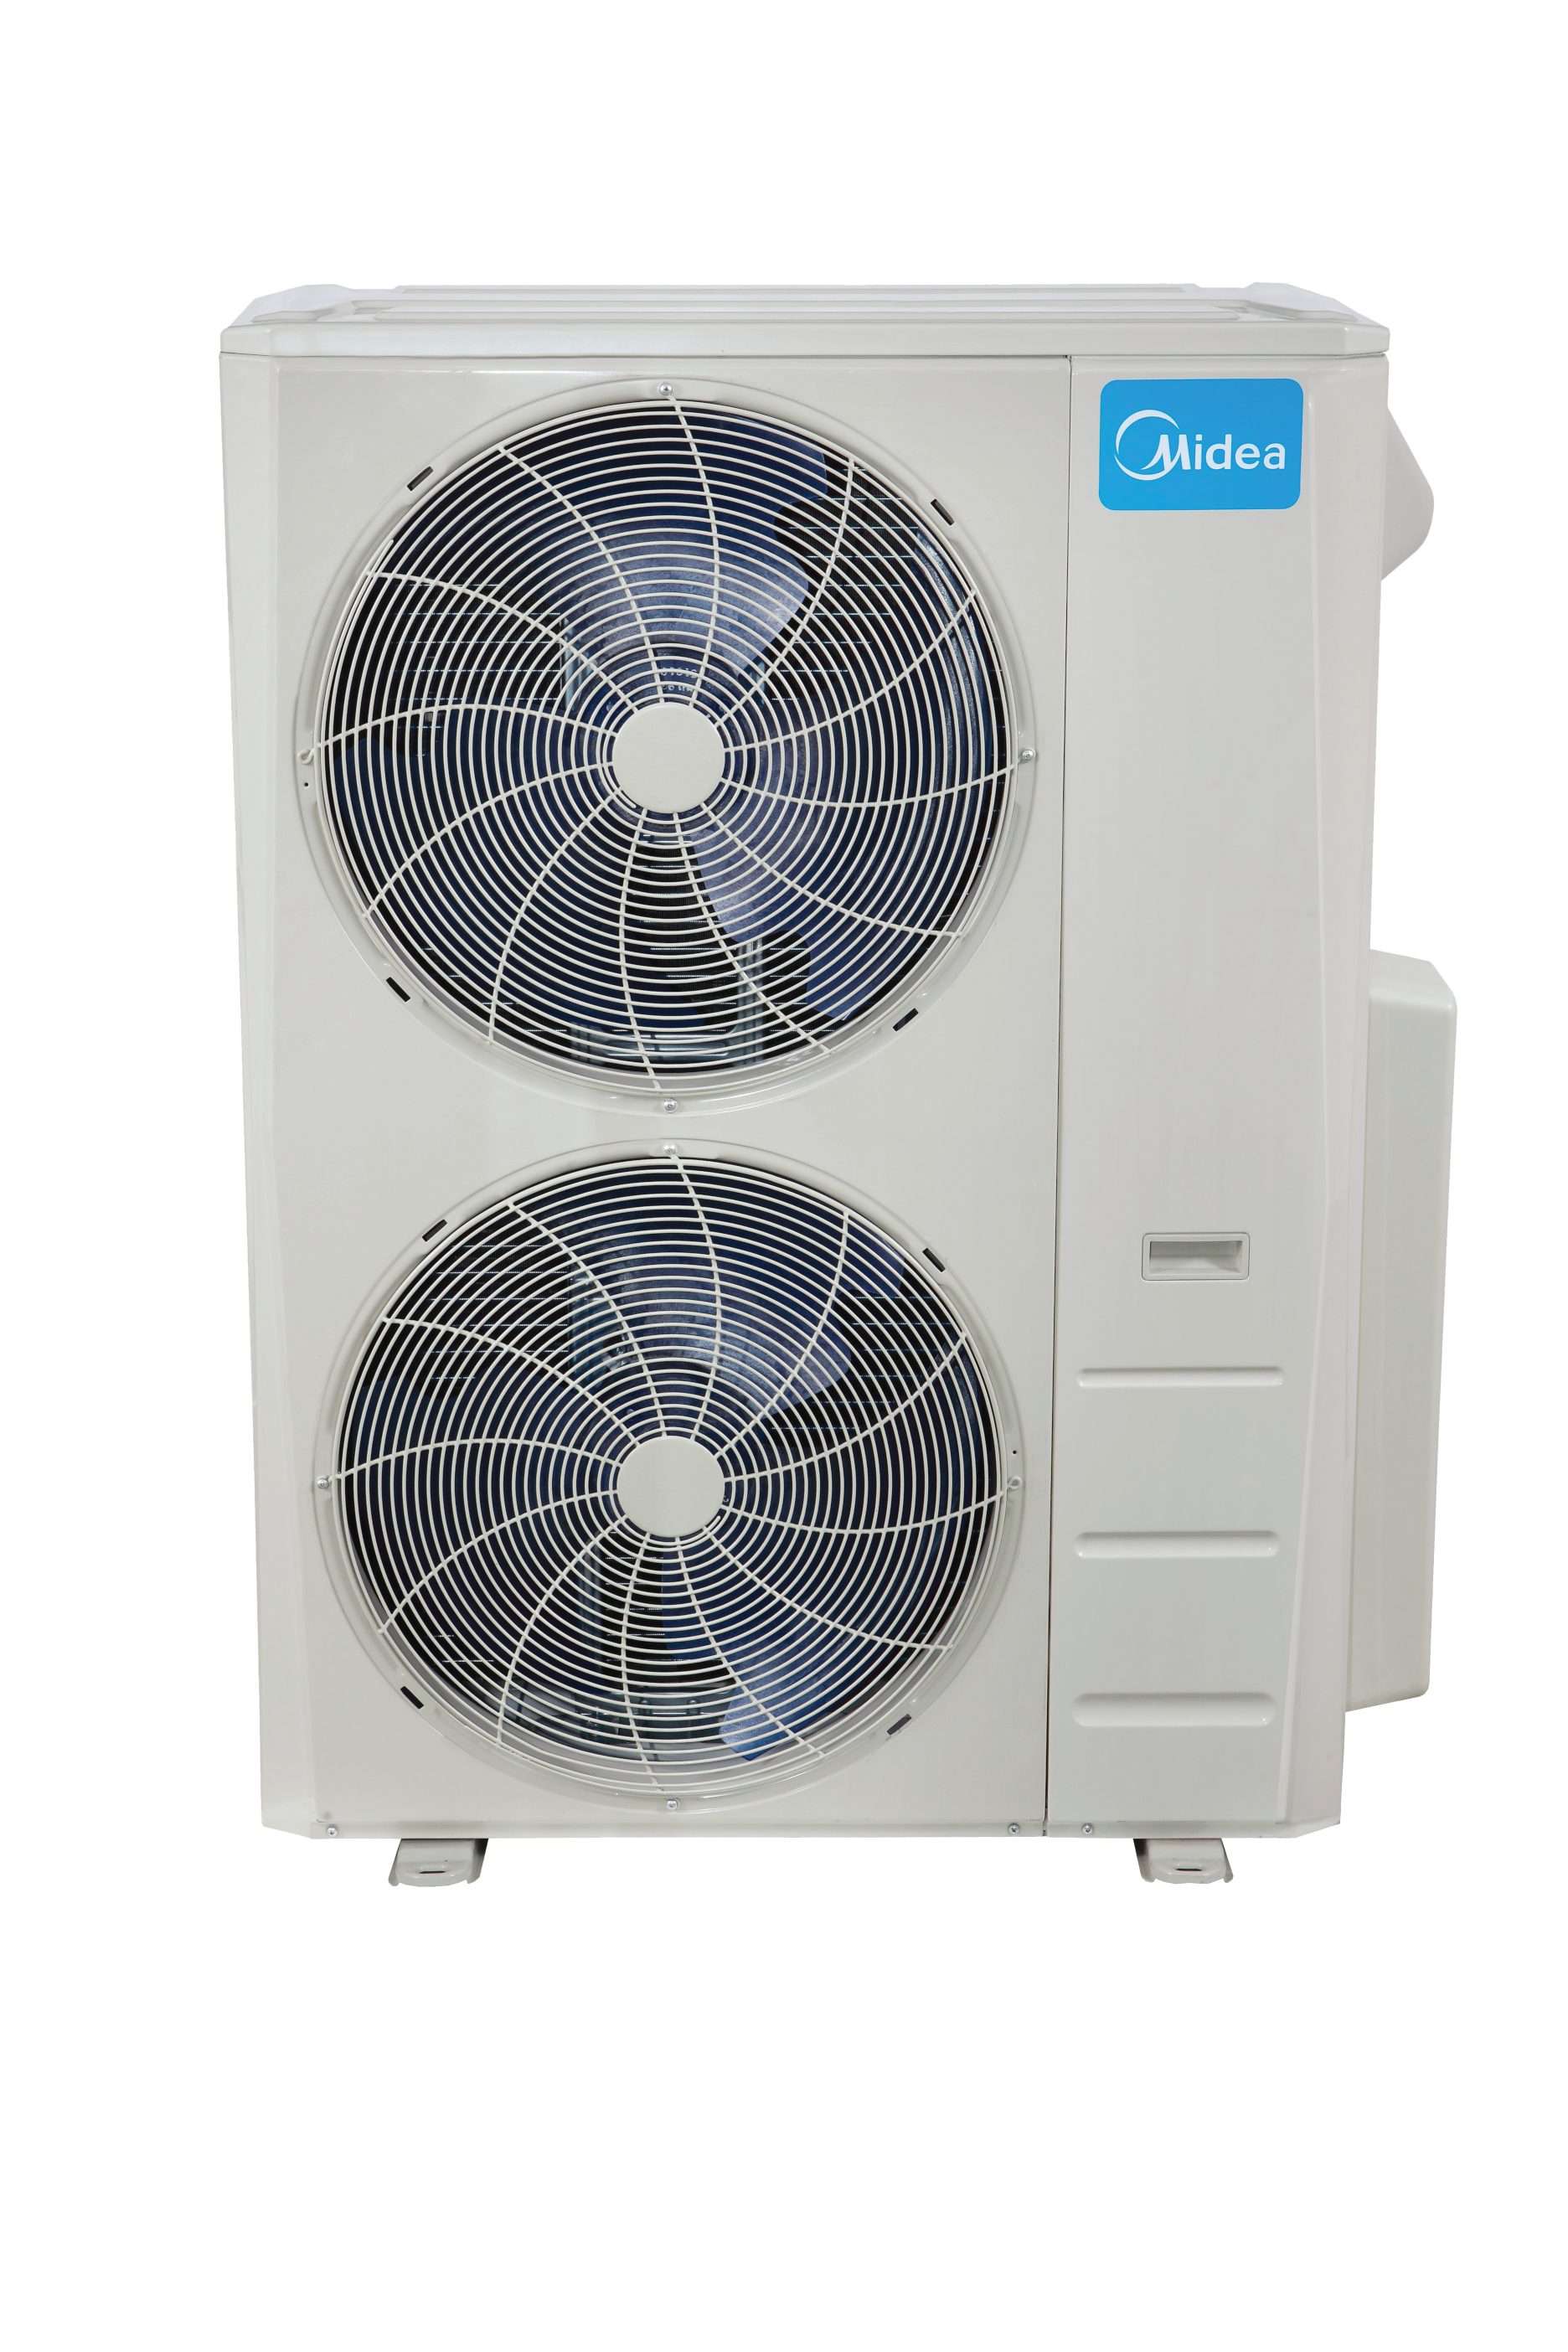 Midea Ductless Systems - Small Planet Supply Canada